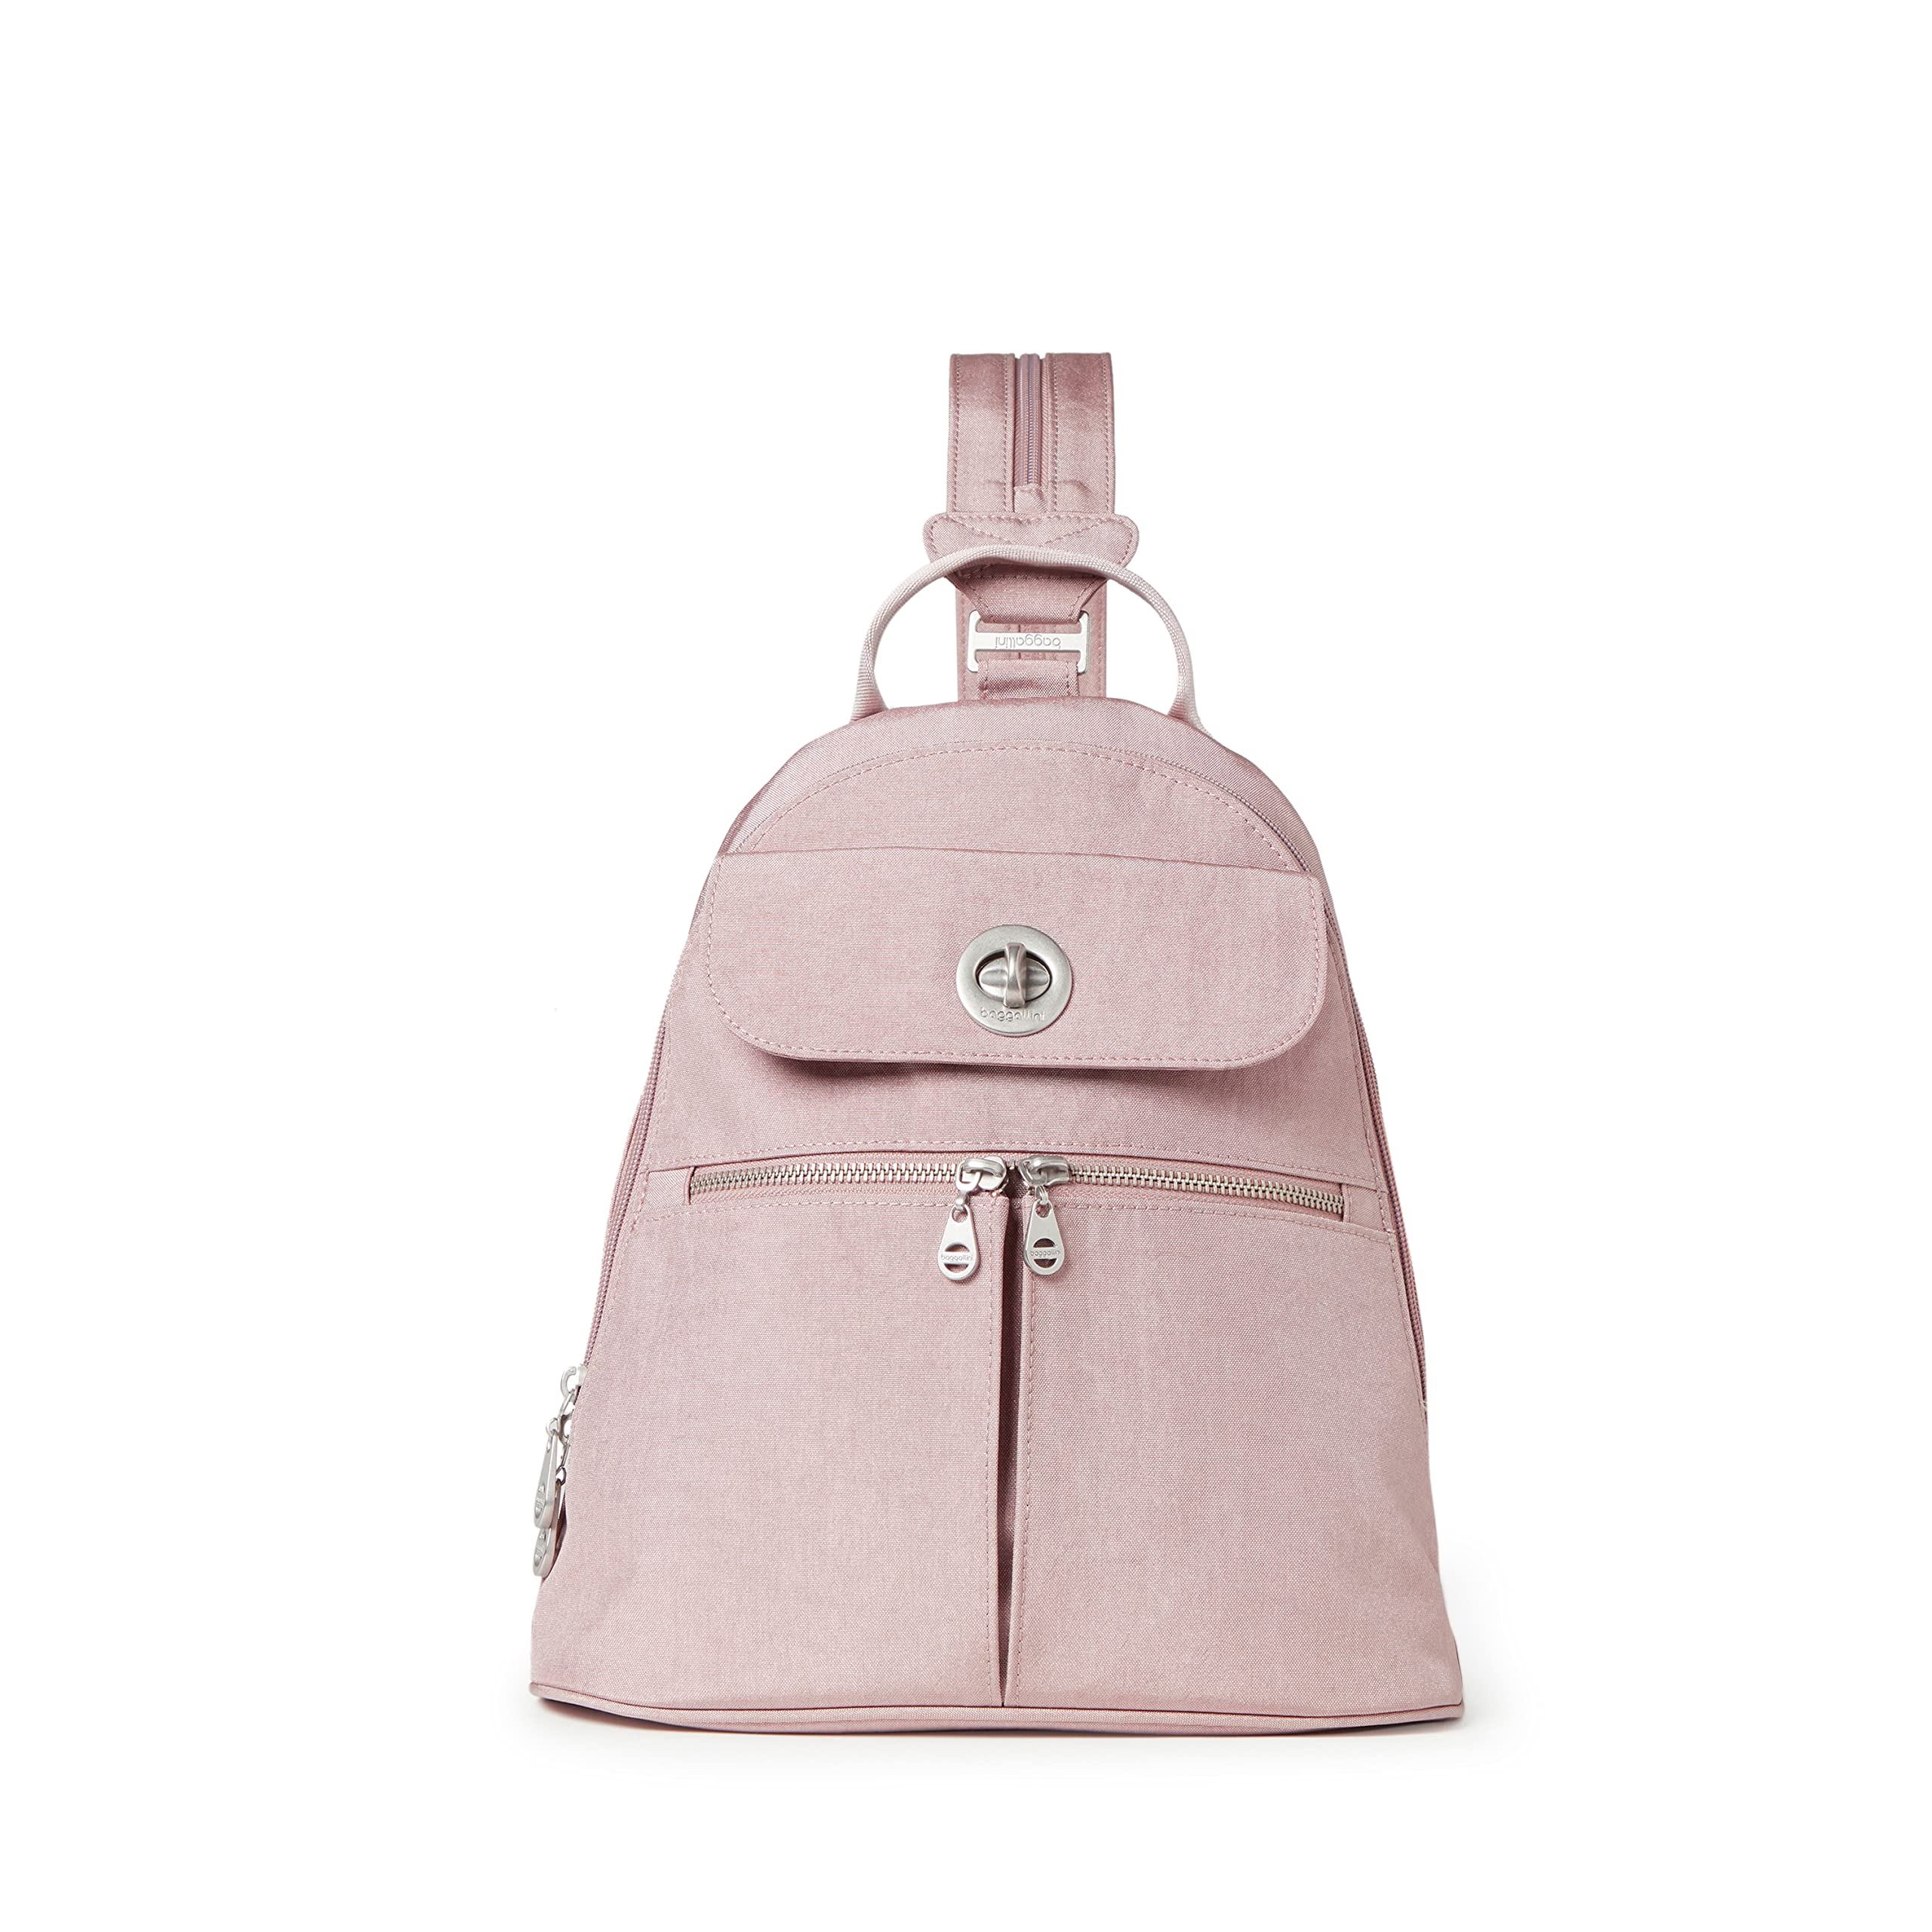 Baggallini womens Naples convertible backpack, Blush Shimmer, One Size US